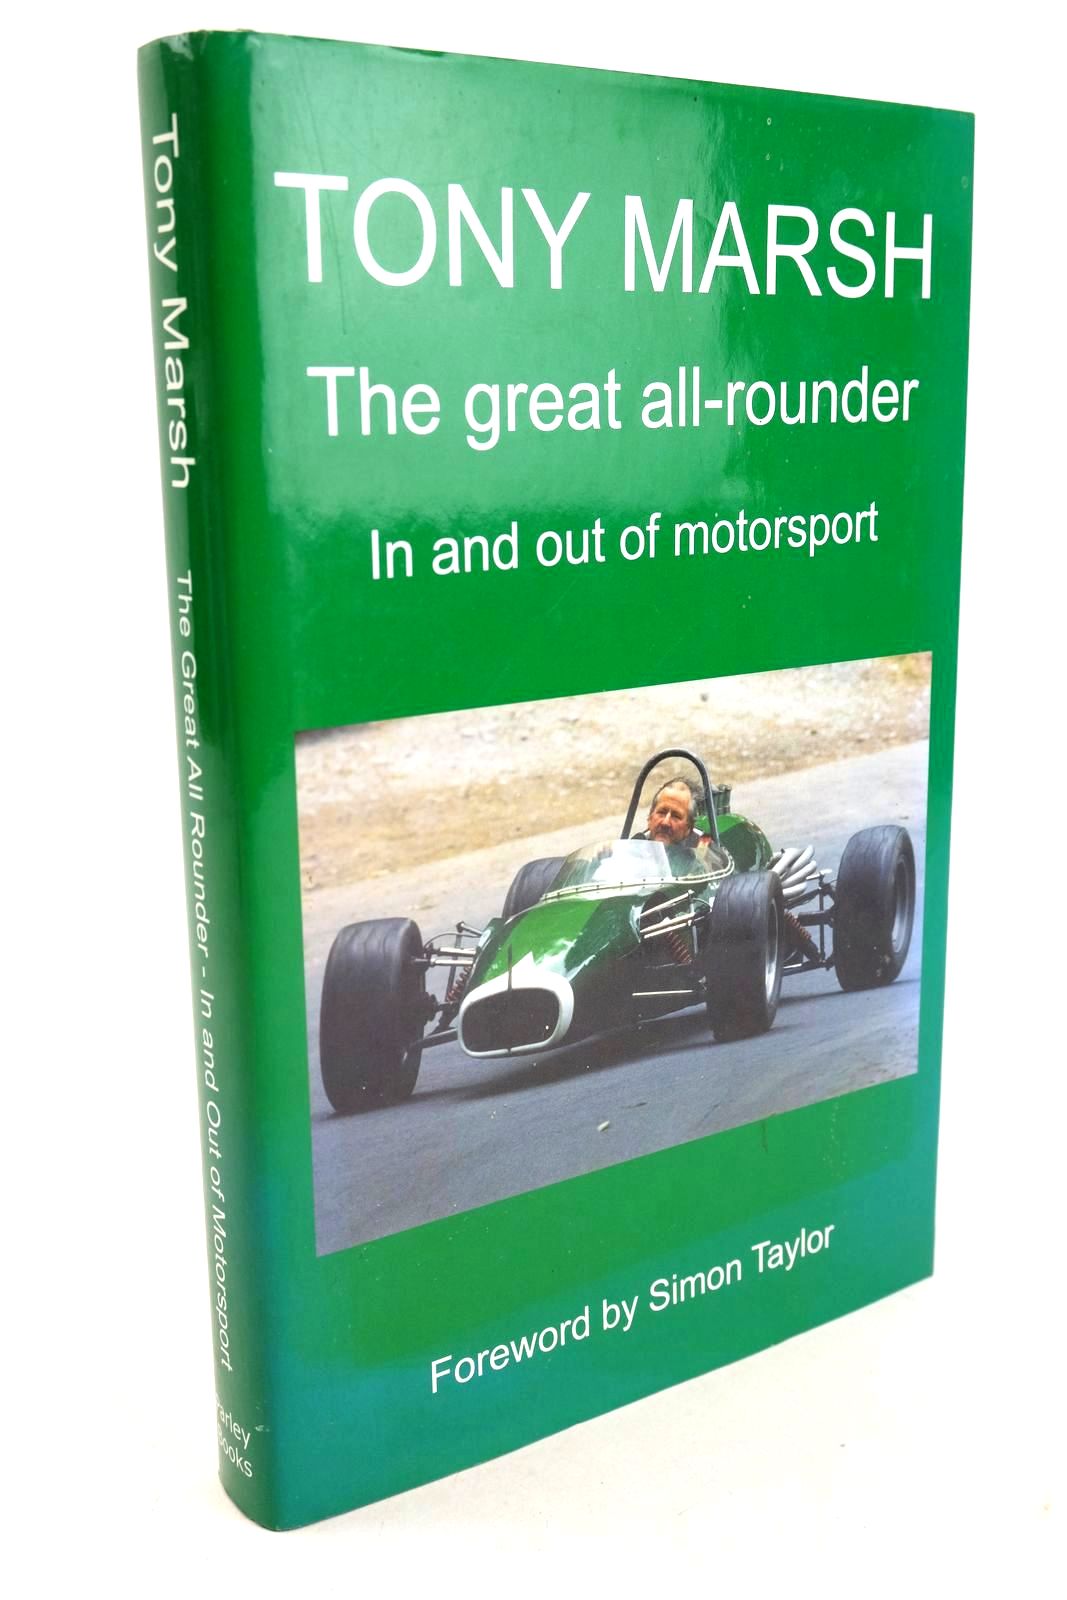 Photo of TONY MARSH, THE GREAT ALL-ROUNDER IN AND OUT OF MOTORSPORT written by Marsh, Tony published by Parley Books (STOCK CODE: 1327418)  for sale by Stella & Rose's Books